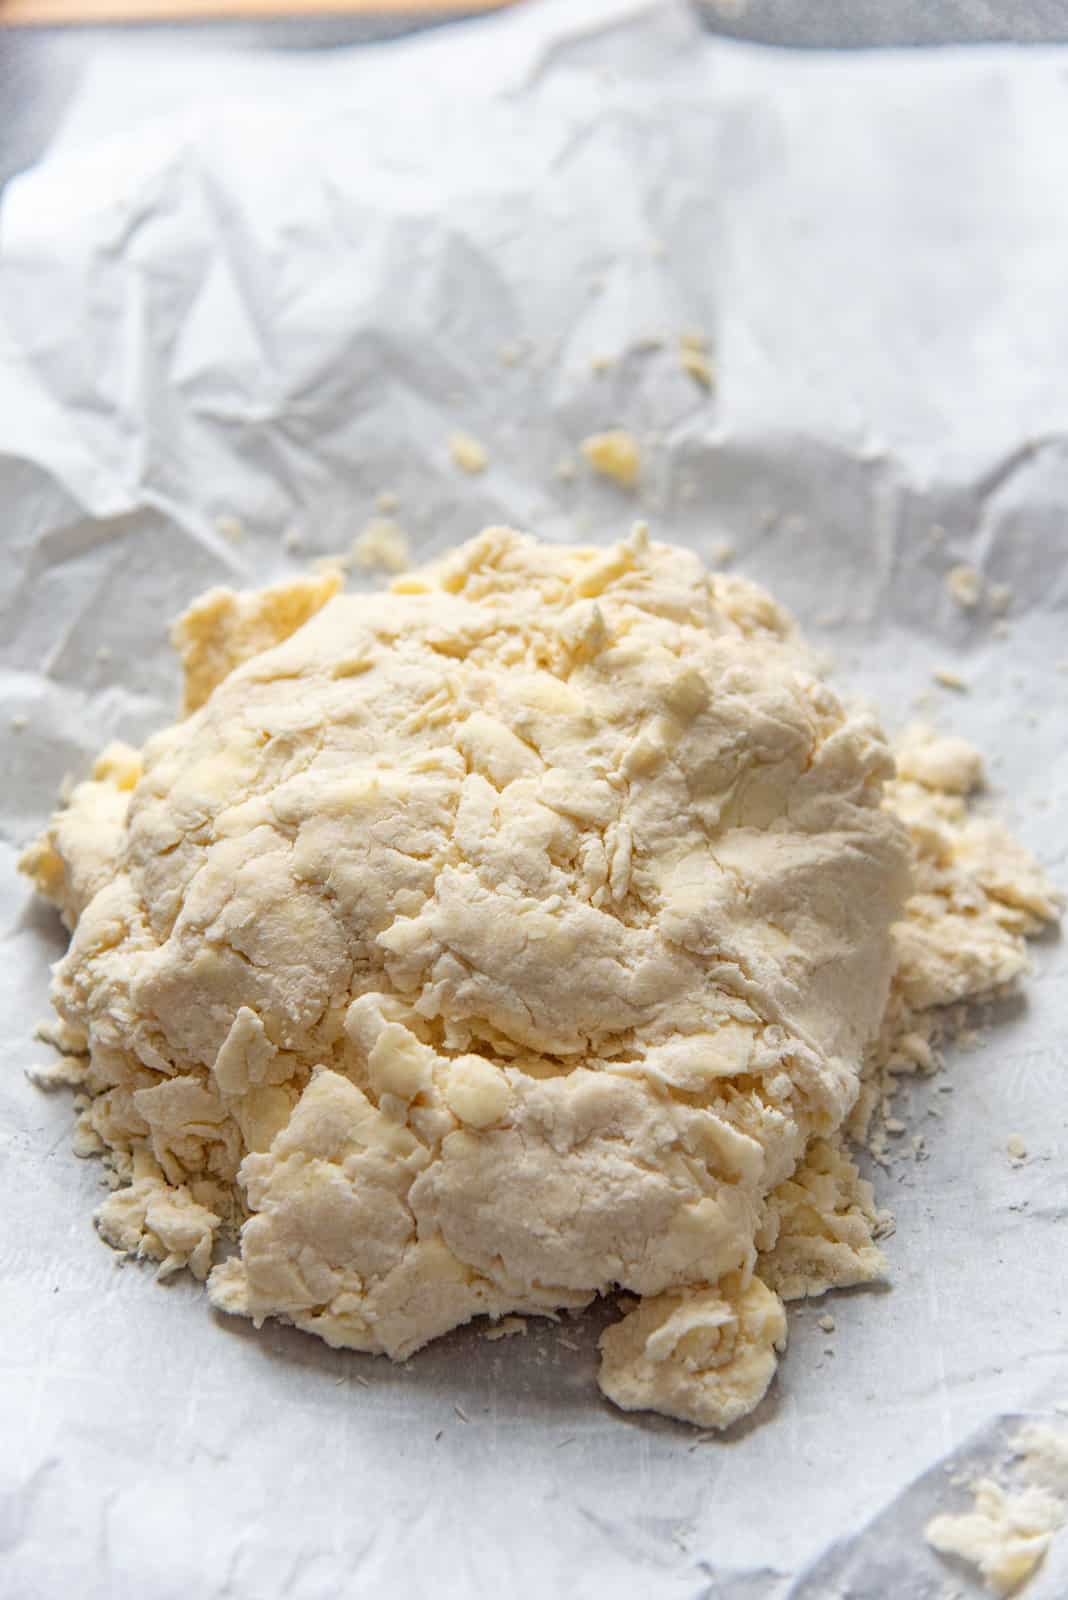 The dough placed on a parchment paper, with large clumps just help together.